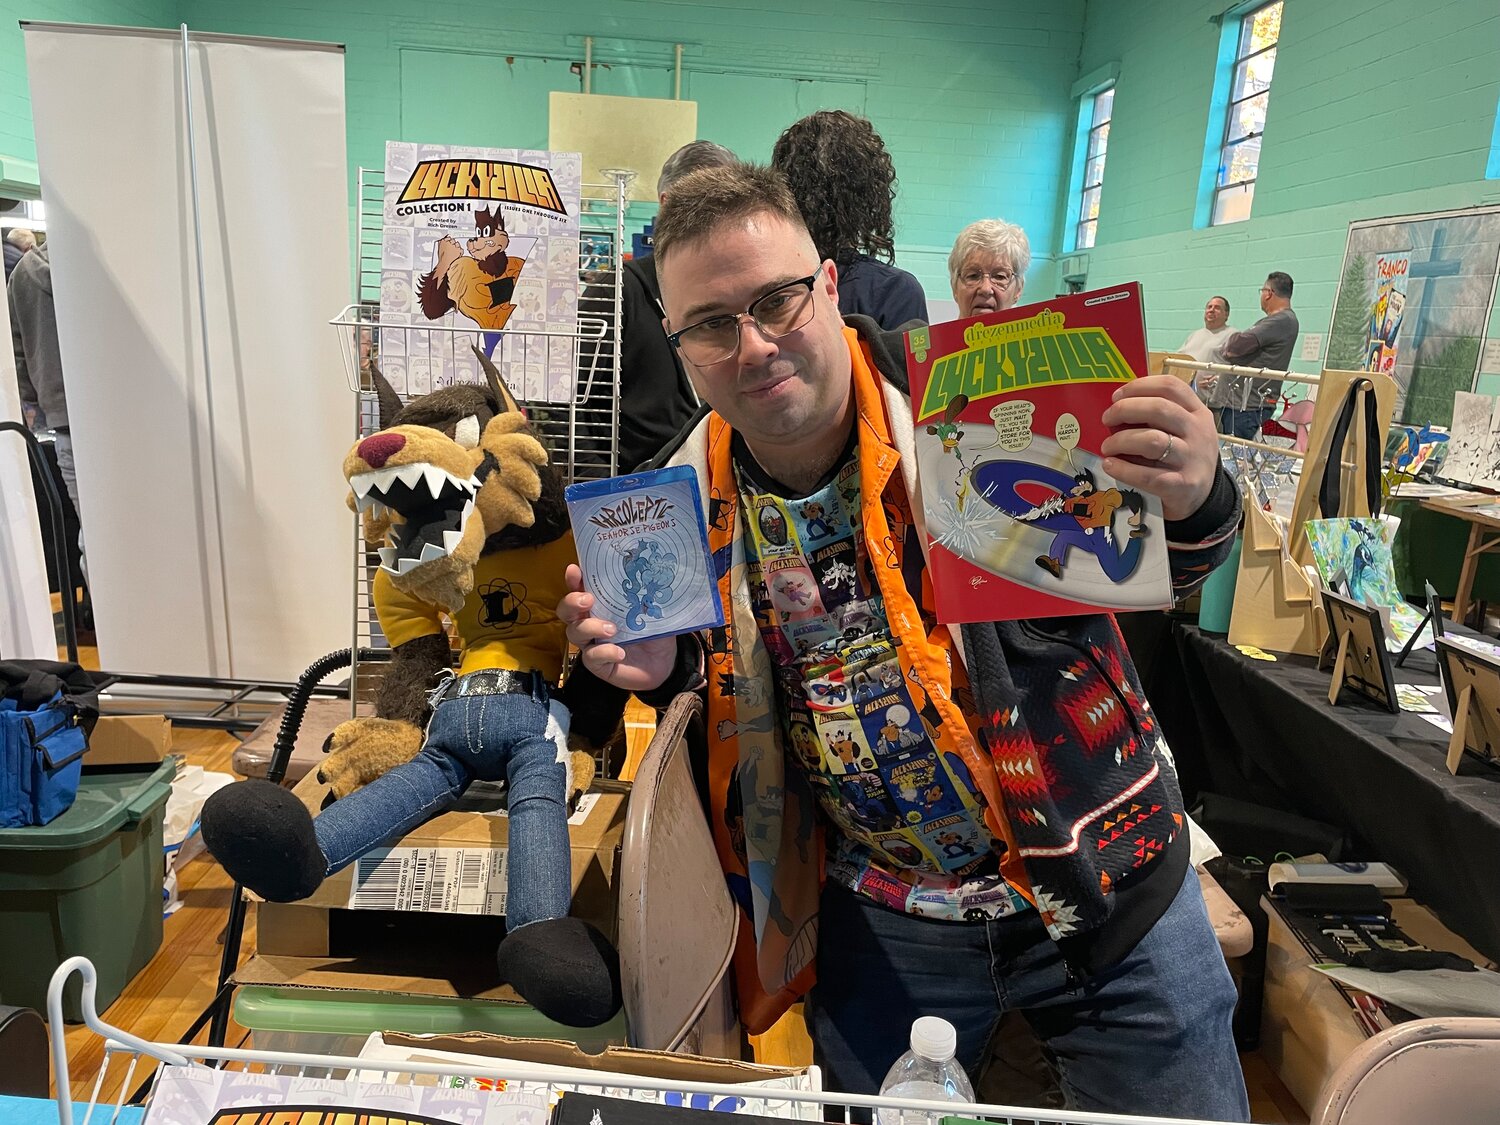 Rich Drezen was inspired by self-published comic artist Tom Travers to start his own comic series. He says that the feeling HurriCon gives him is second only to breathing.